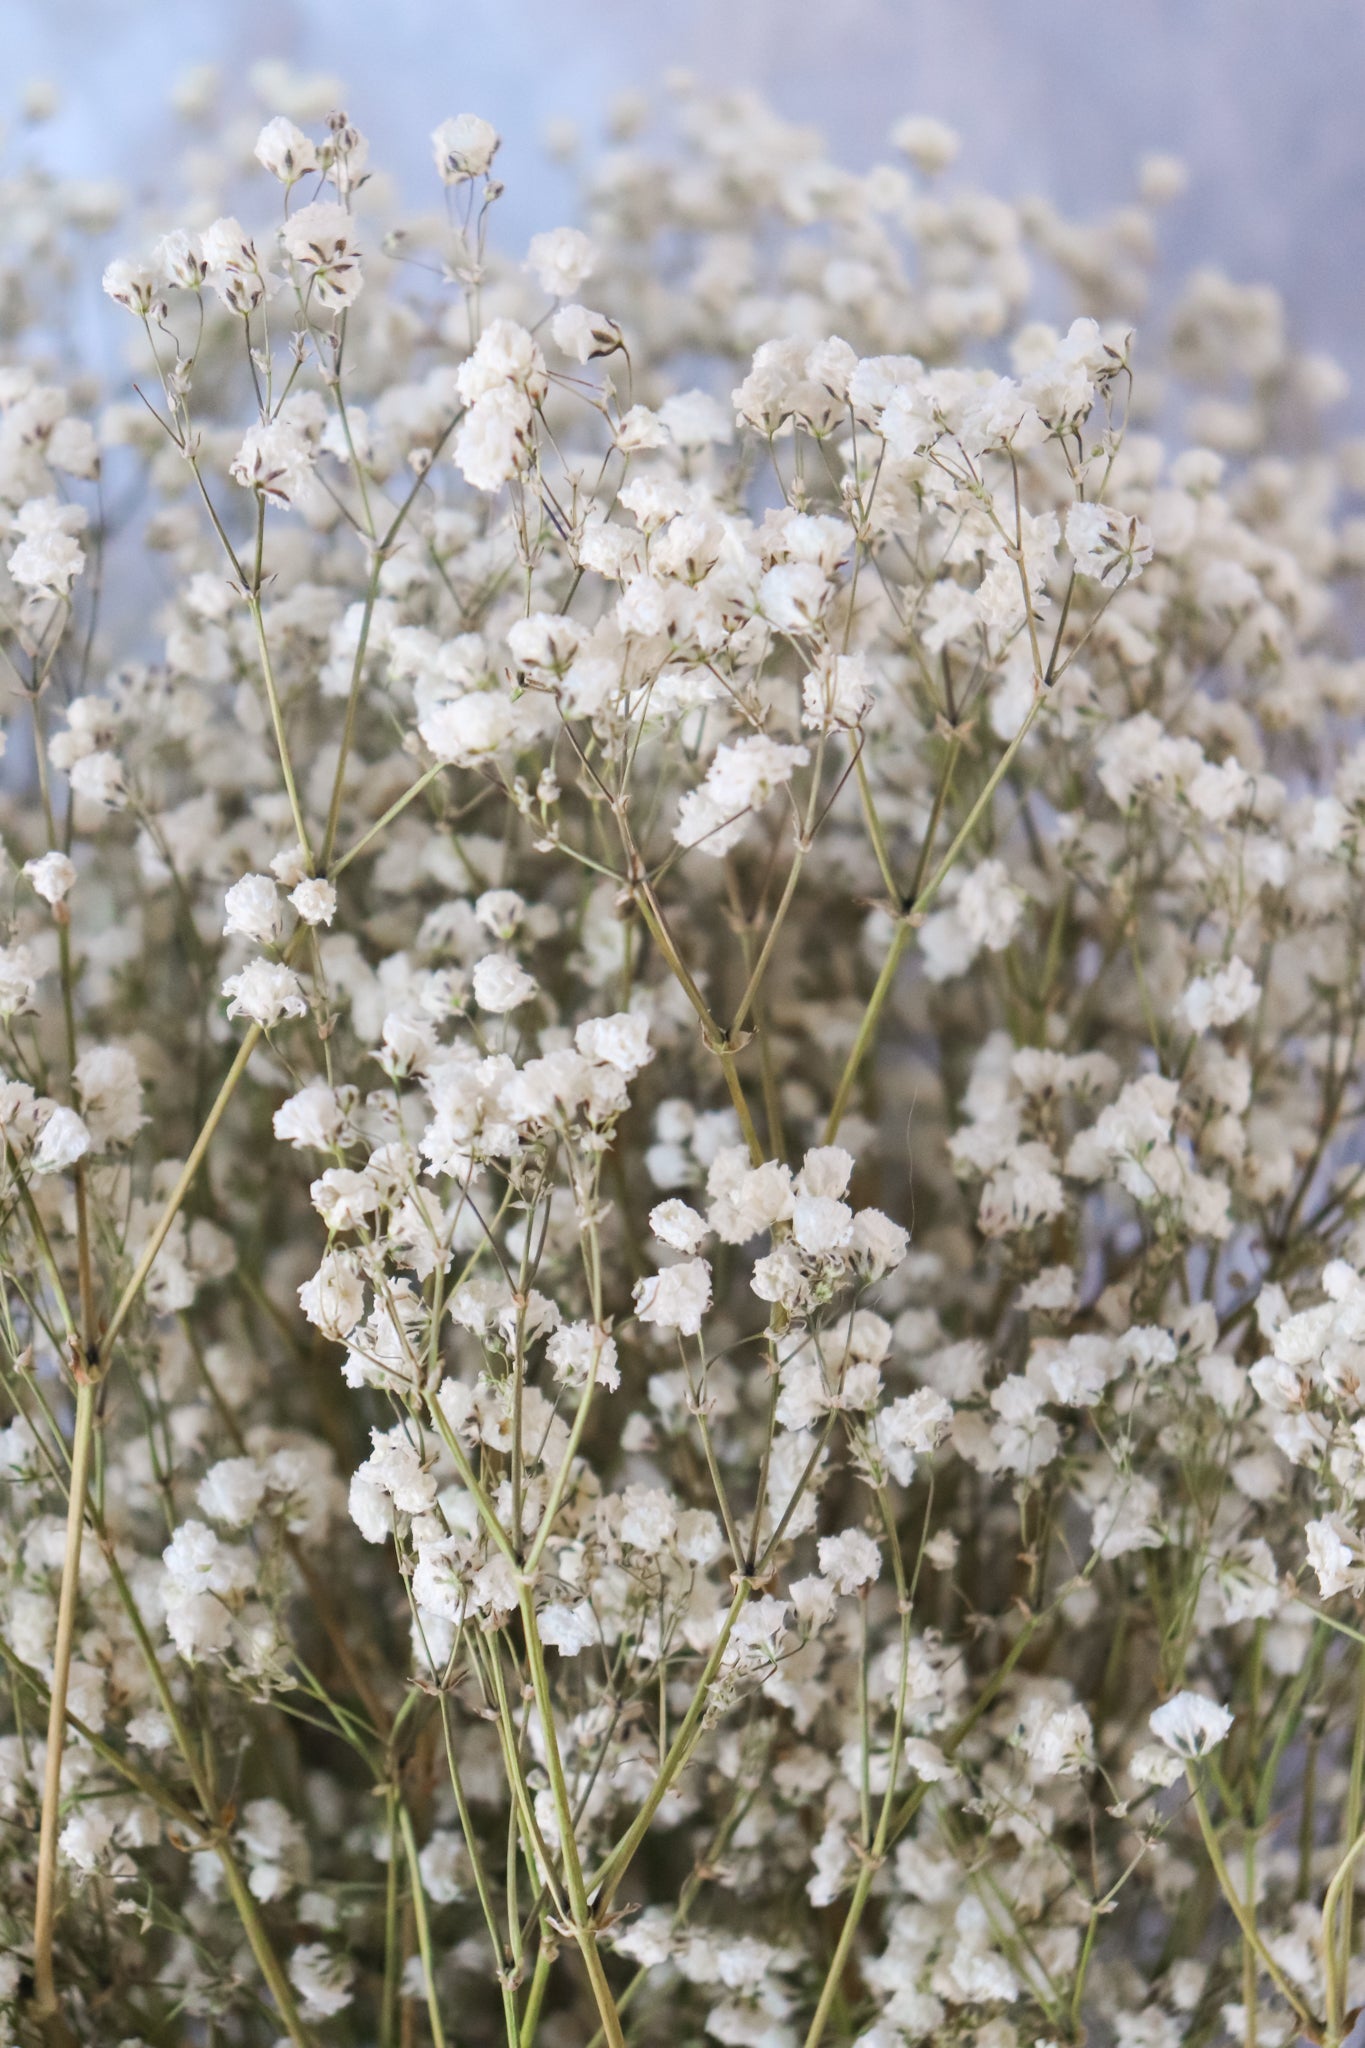 Dried Baby's Breath Dry Flowers Natural Gypsophila Stems – the Peachy Day